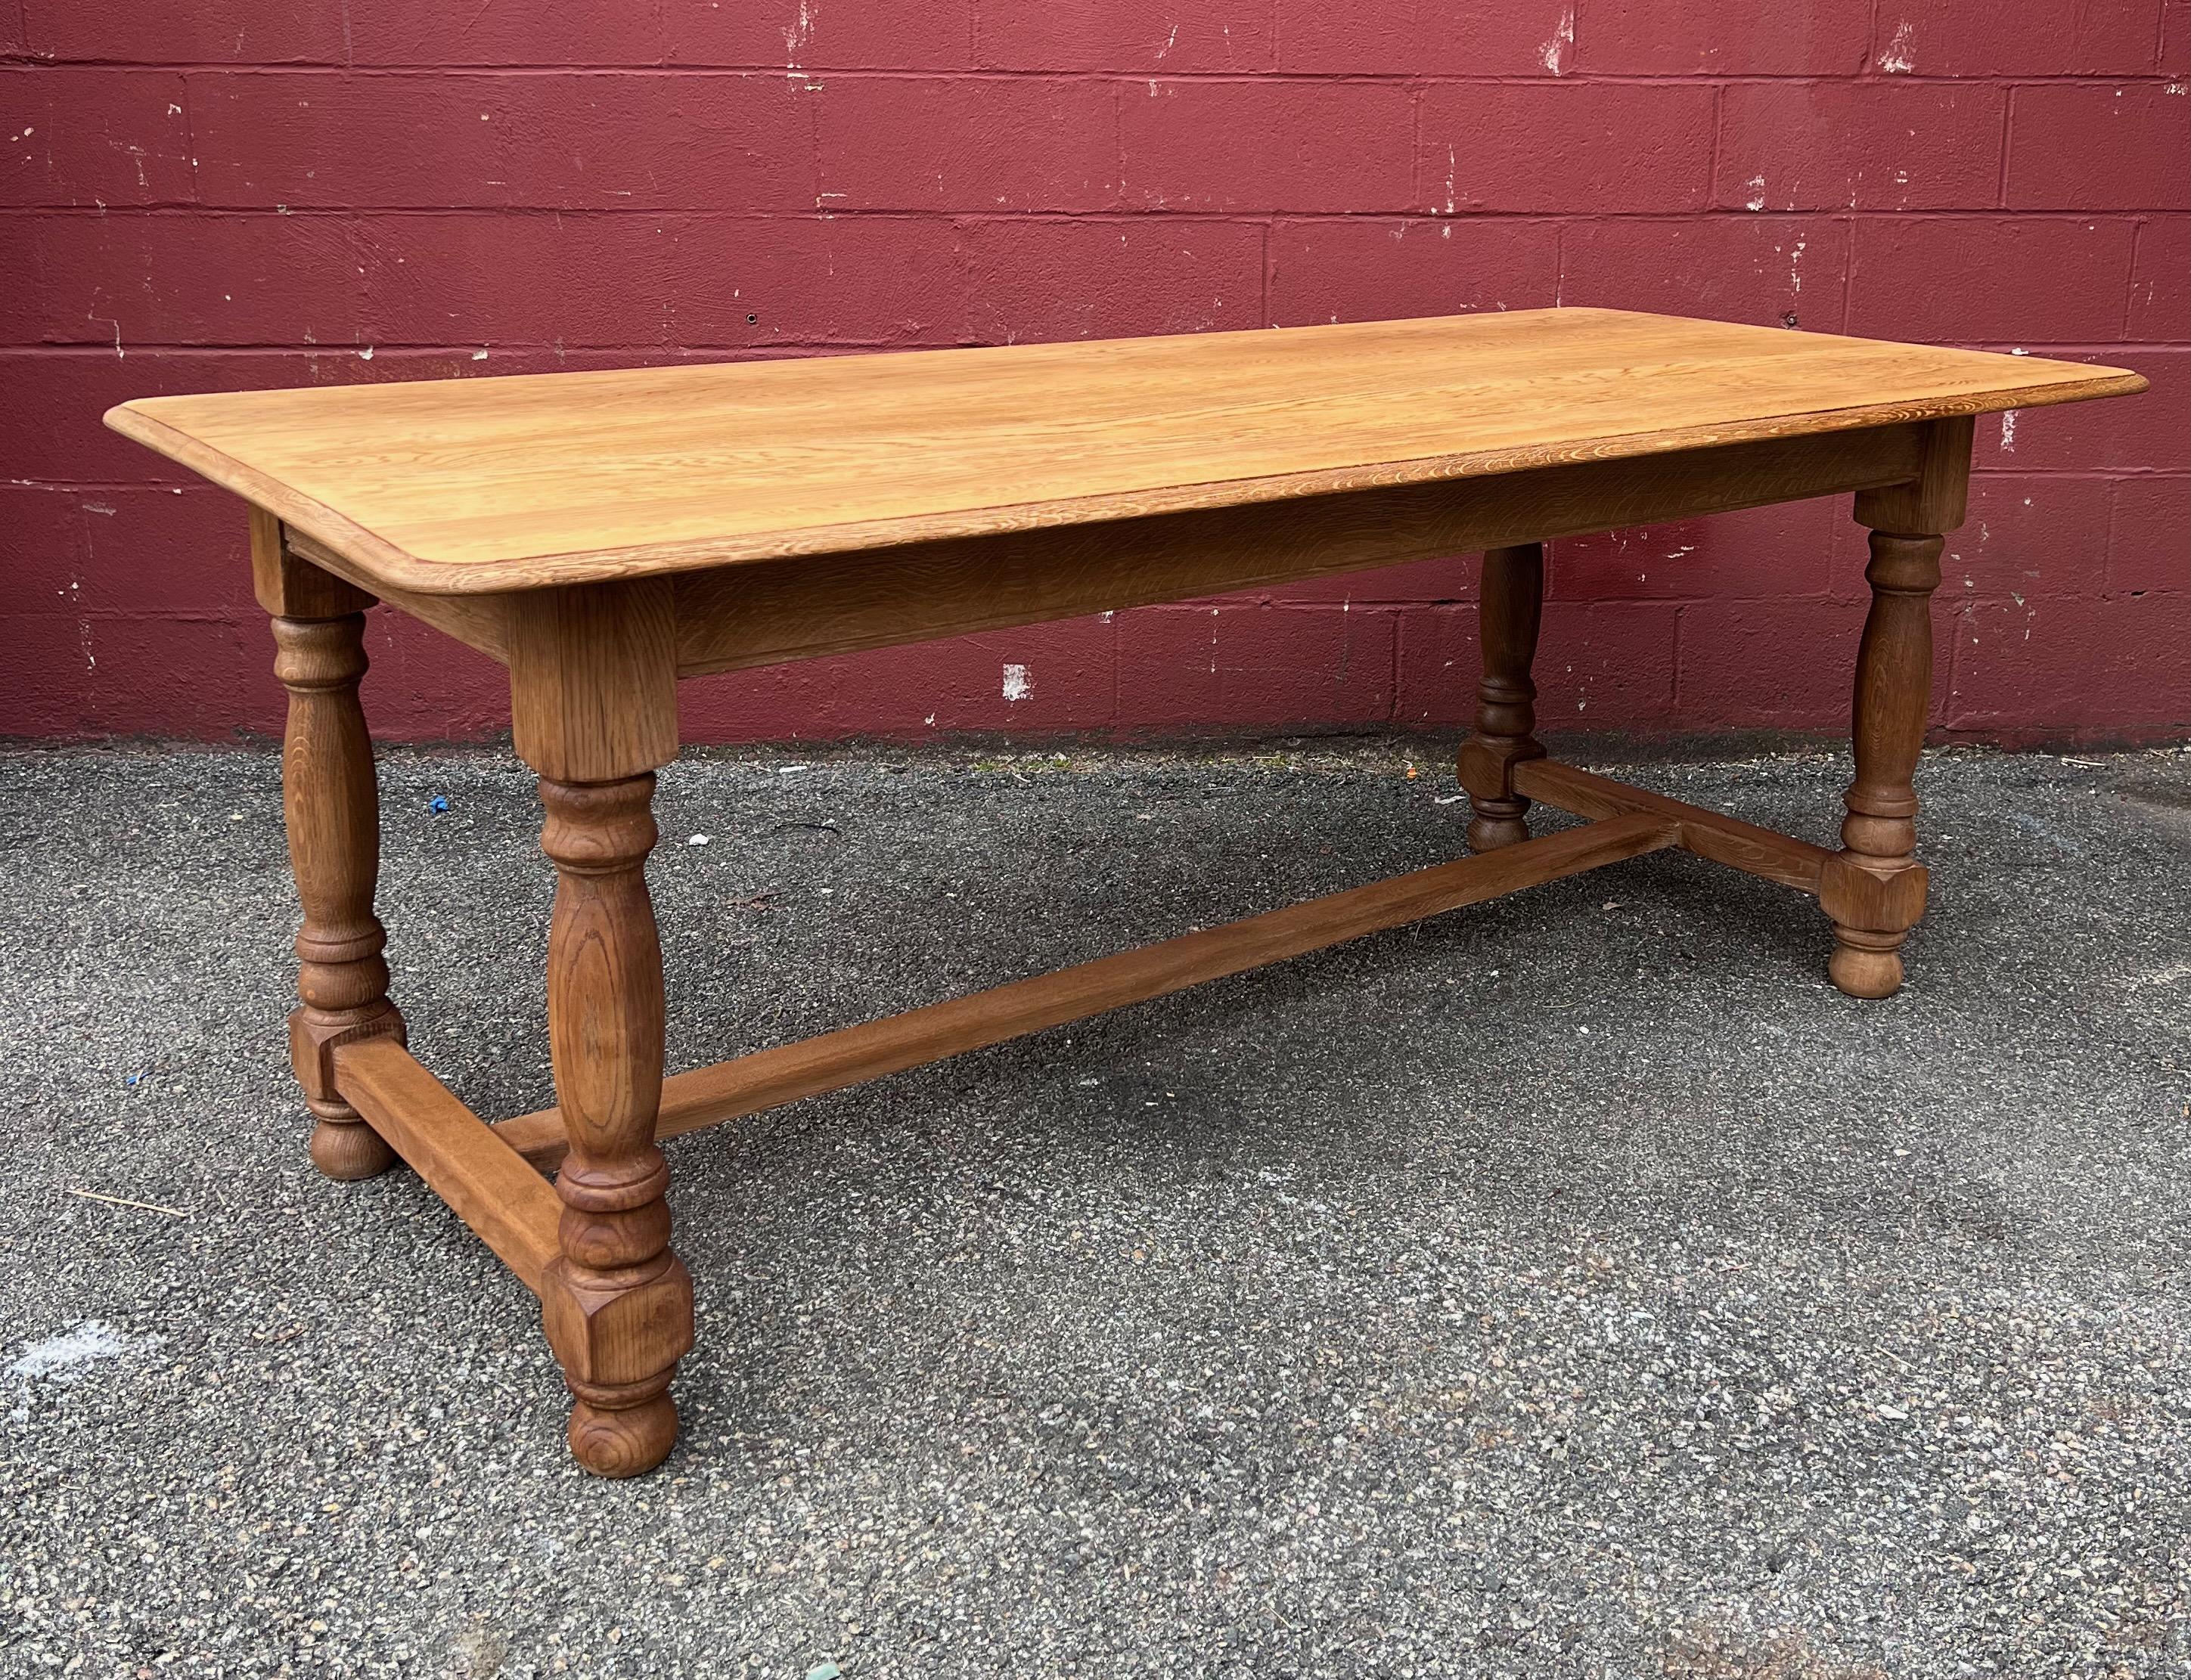 This large 1950s French oak dining or hall table features beautifully turned legs with a lower stretcher. Its sturdy construction makes it perfect for daily use, built to withstand the test of time while providing an enduring sense of elegance and